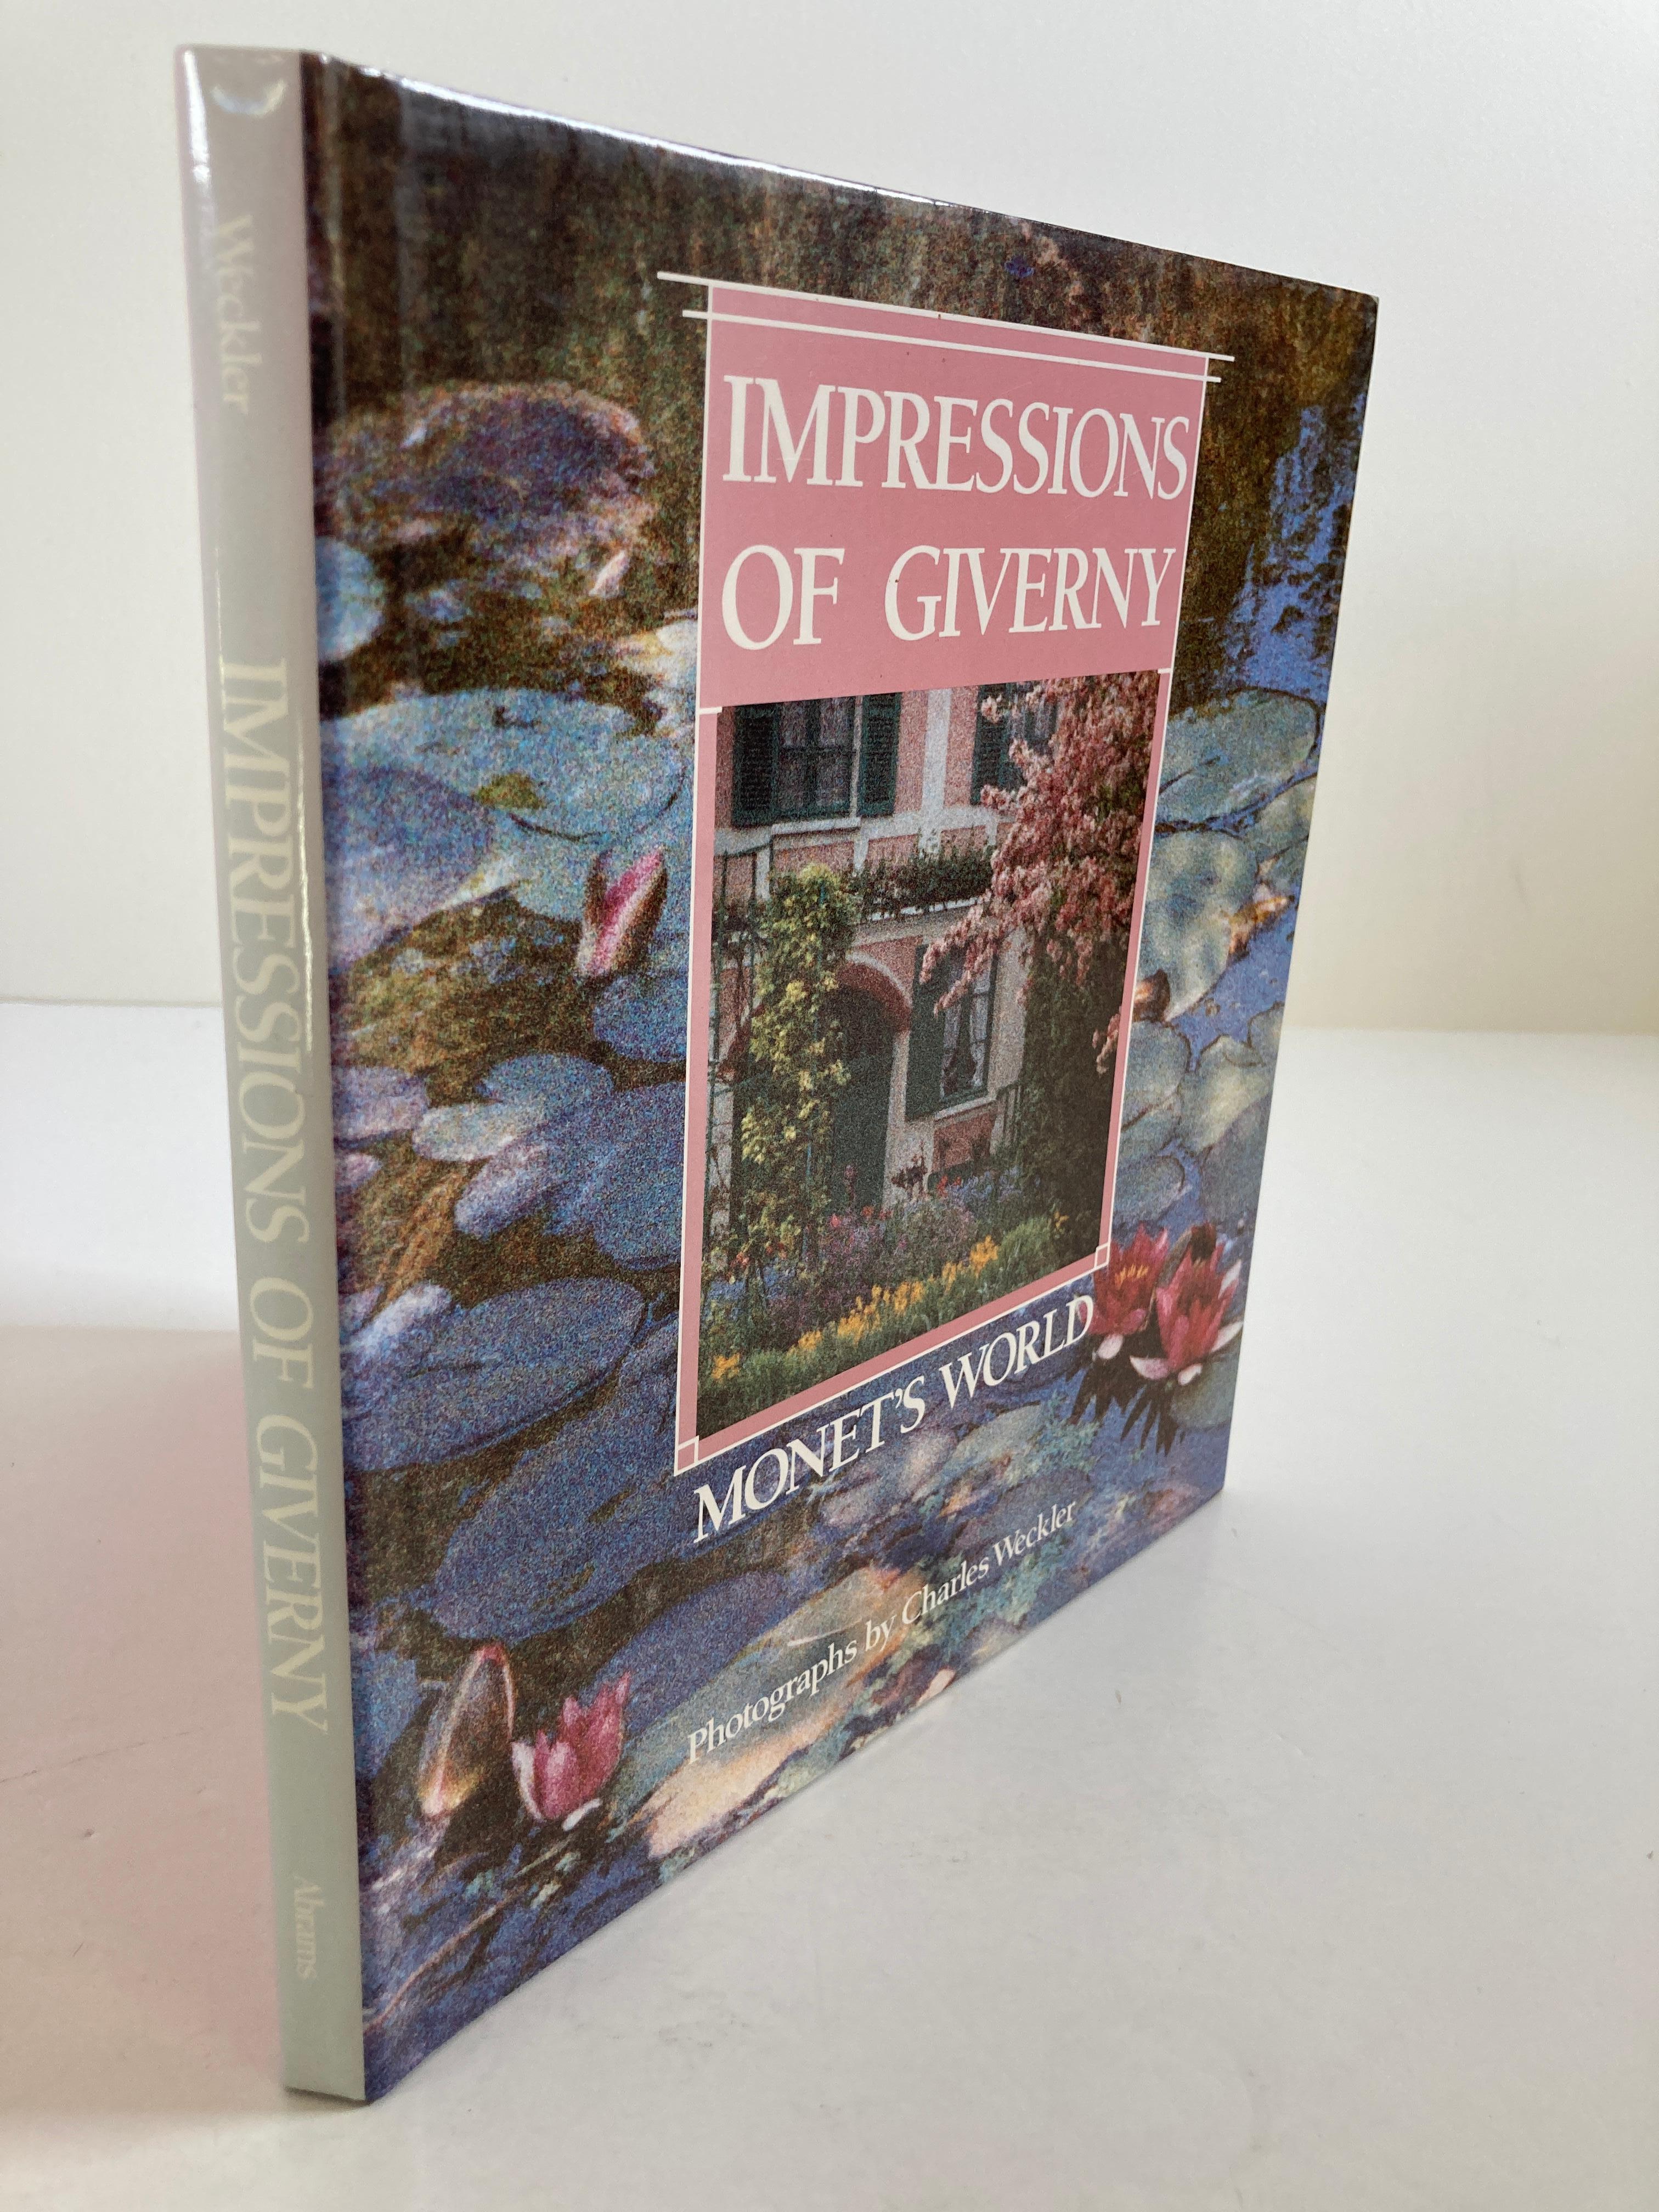 Impressions of Giverny Monet's World Charles Weckler hardcover book
A short text describes impressionist Claude Monet's house and gardens at Giverny, a village 40 miles northwest of Paris, where, from 1883 until his death in 1926, the artist lived